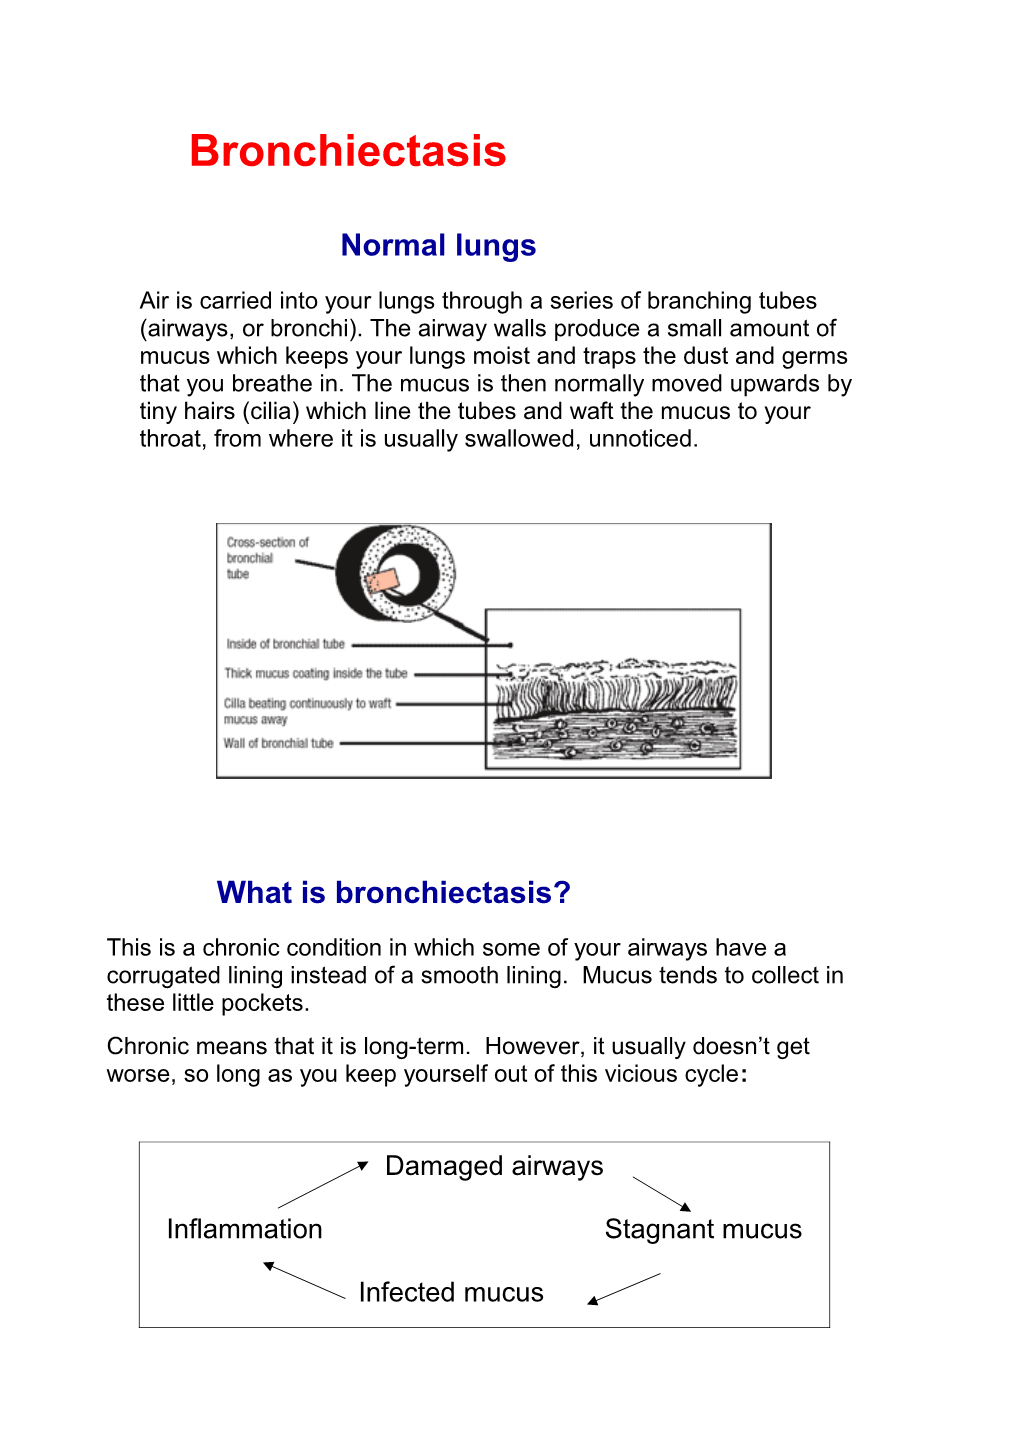 What Is Bronchiectasis?